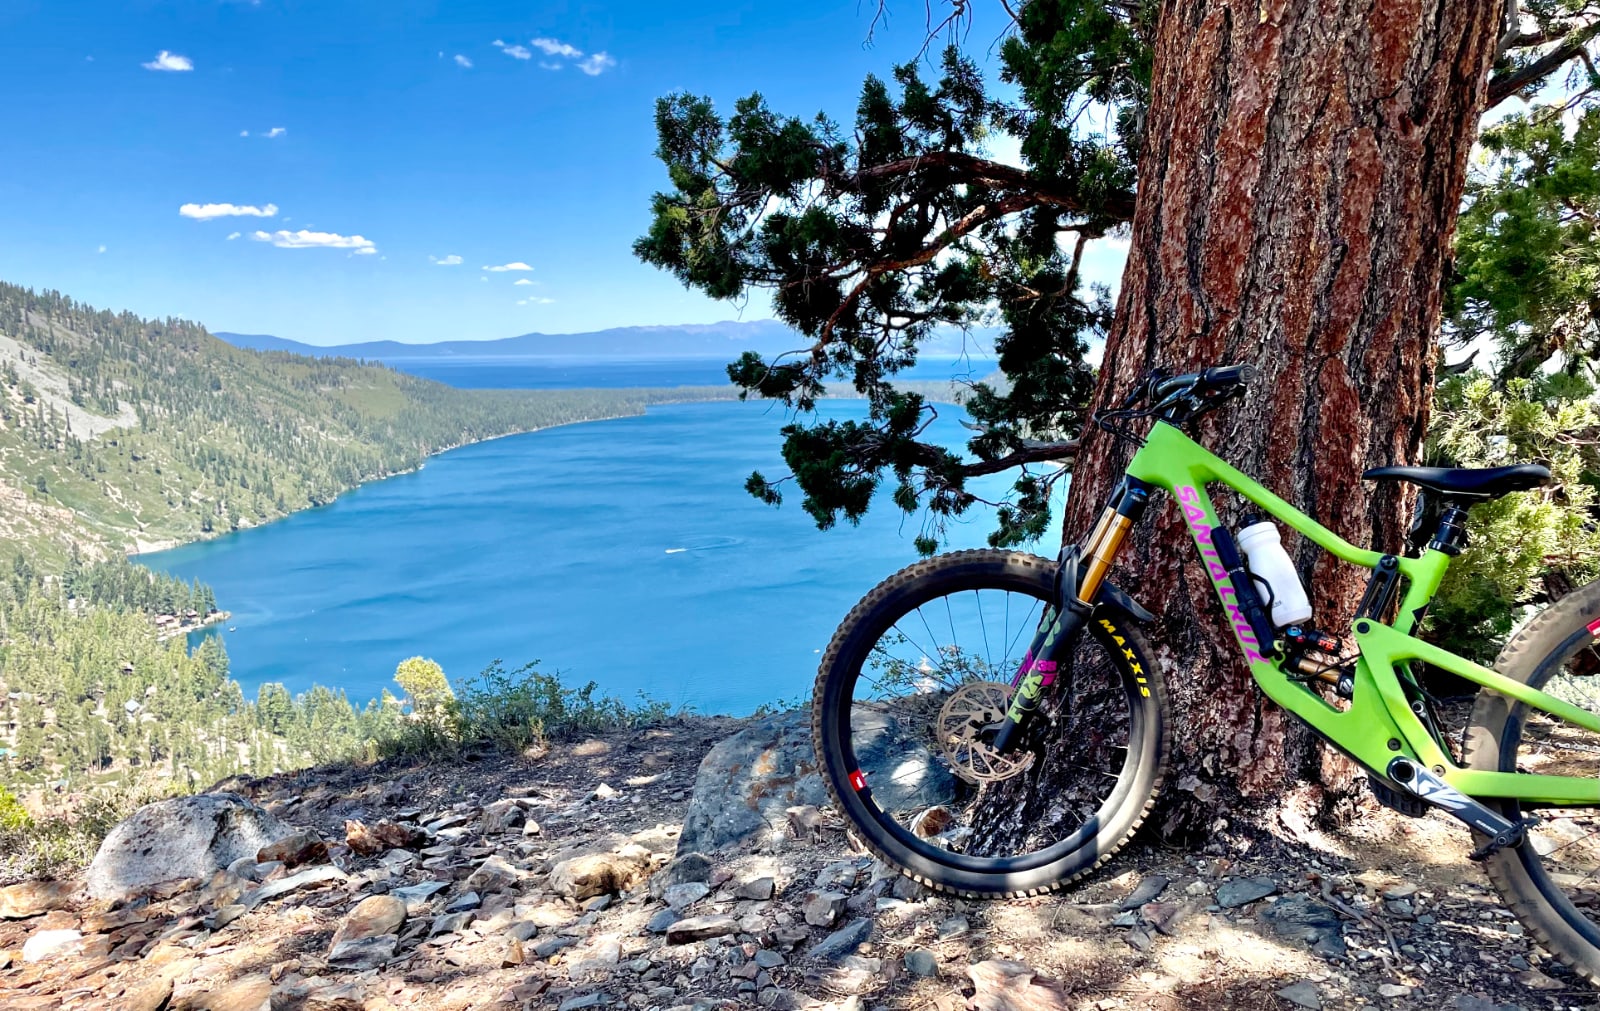 My mountain bike on the Lily Lake trail in South Lake Tahoe